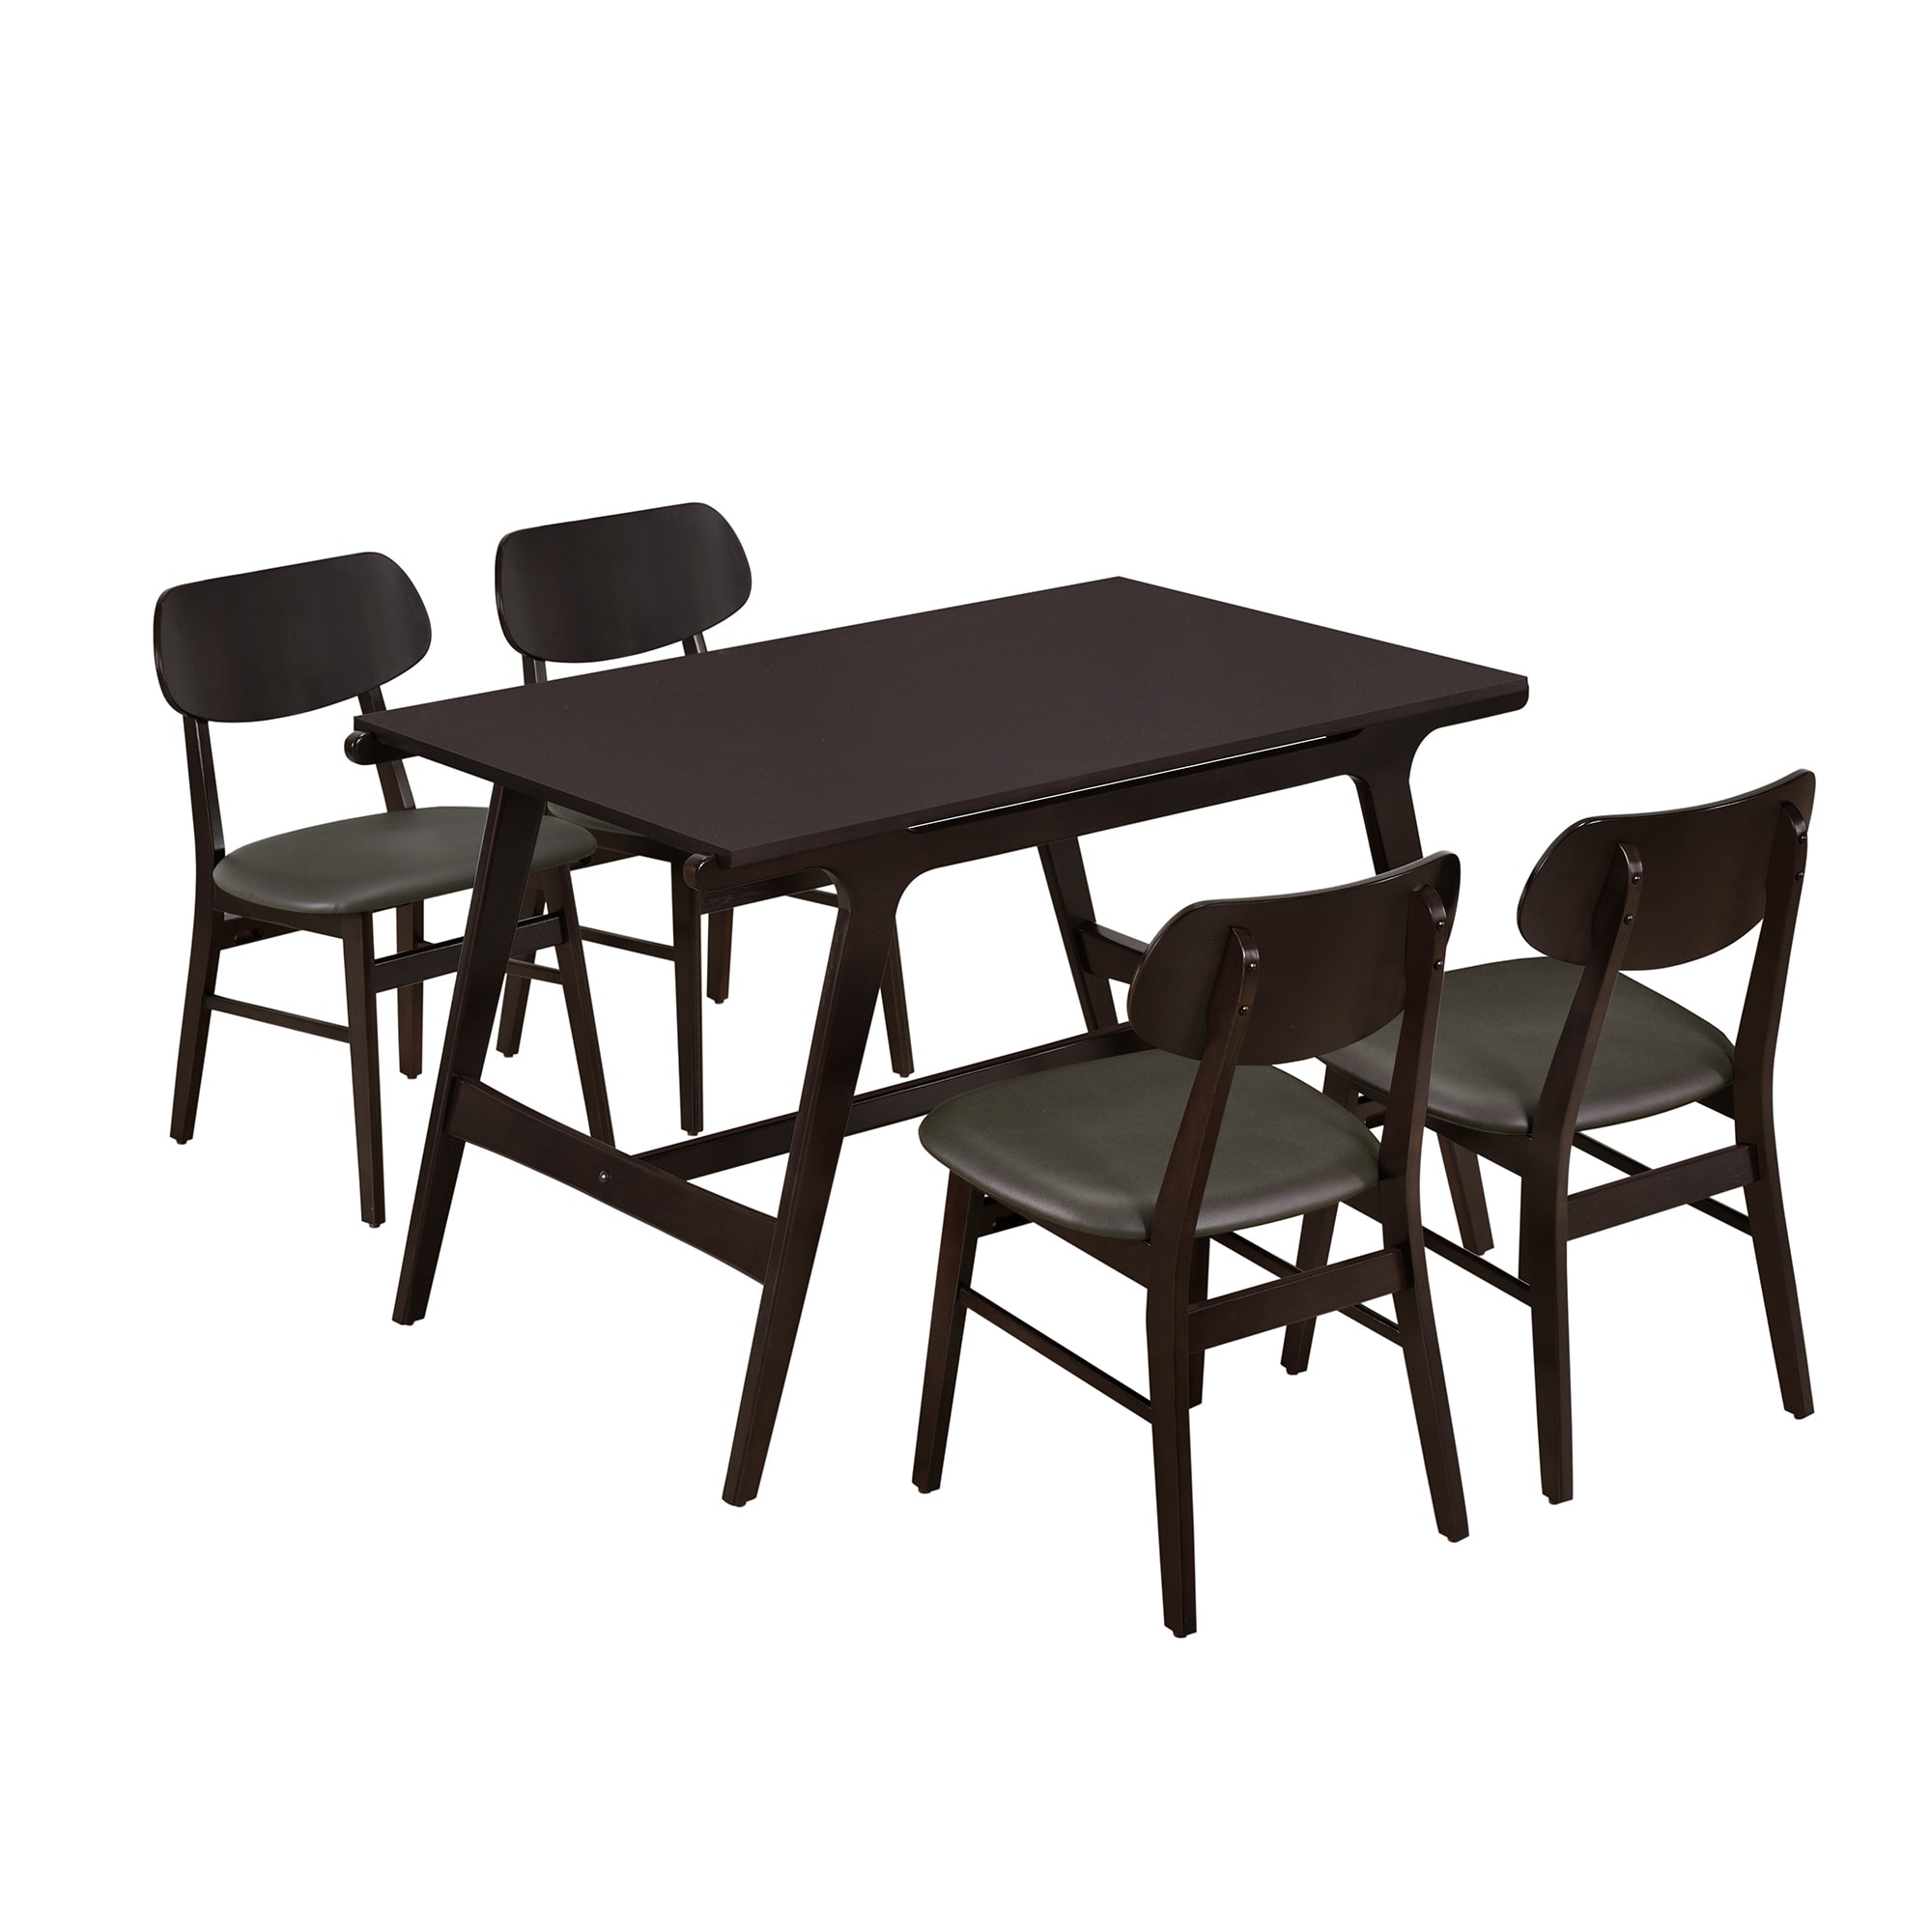 Wenge Mid-Century Style 5-Piece Dining Table Set with Faux Leather Chairs, Minimalist Design, Sturdy Construction